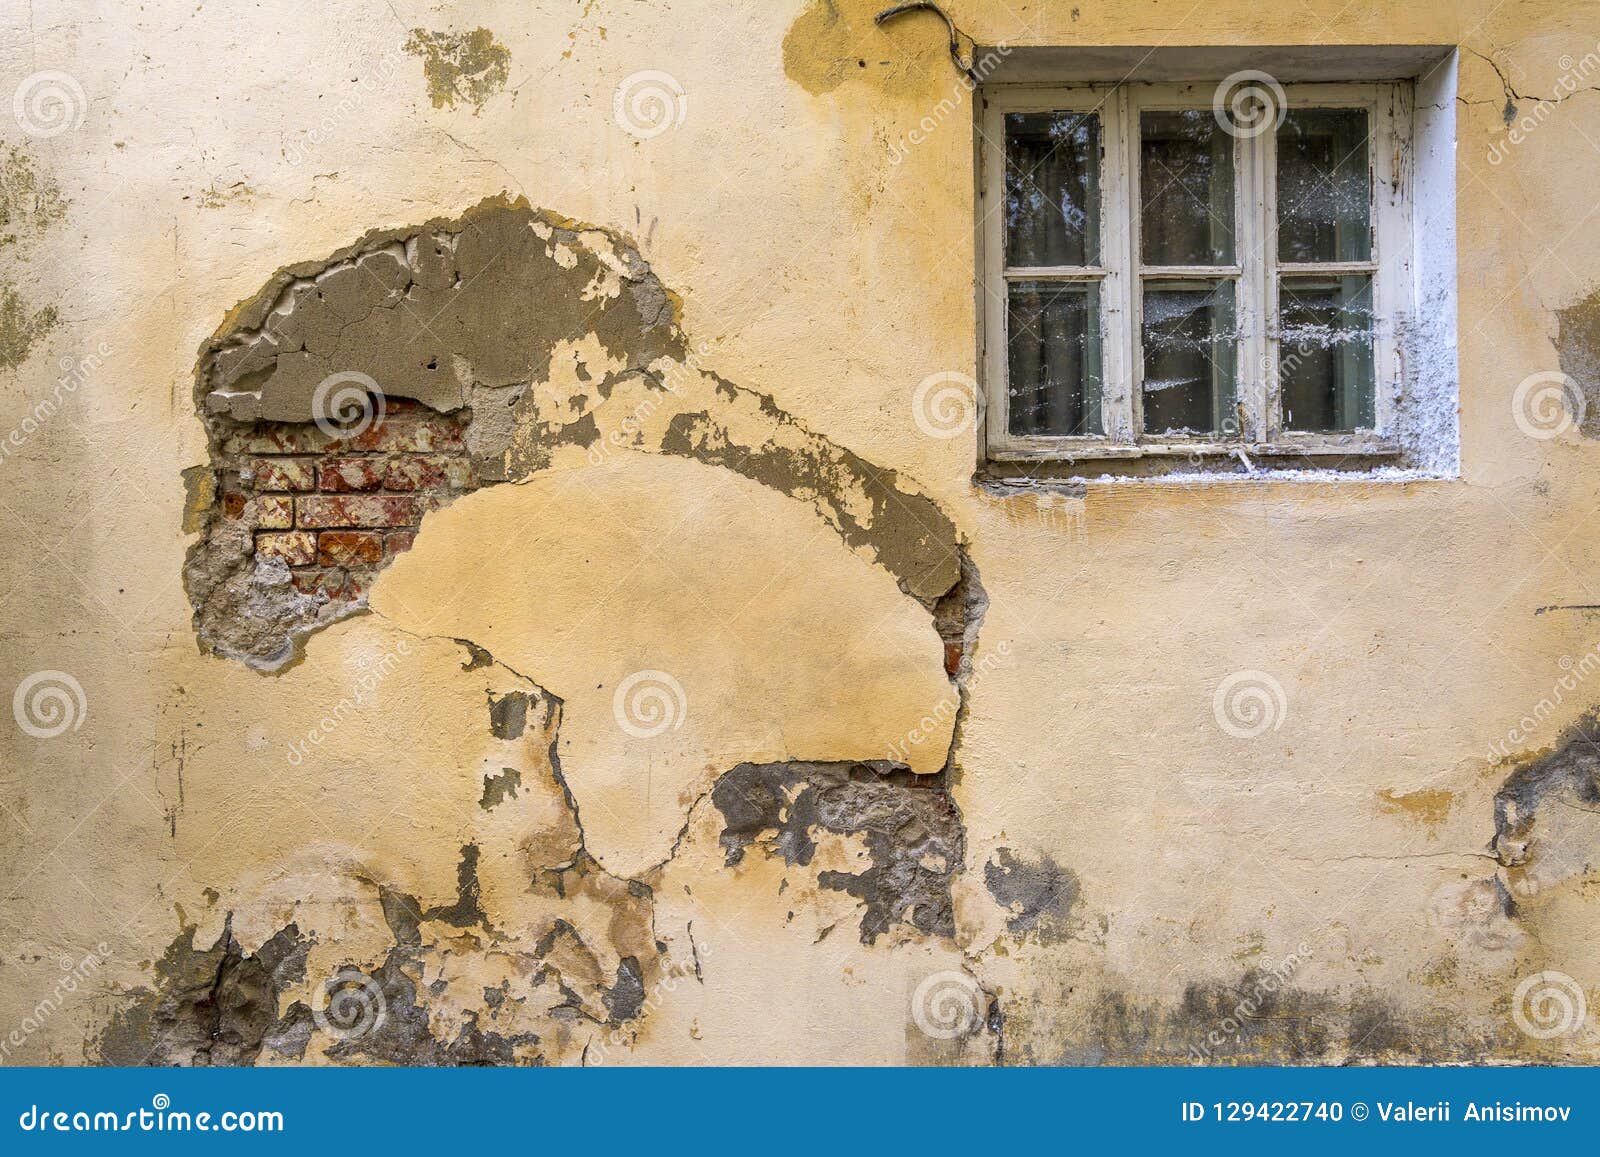 The Wall of an Old House with a Window. the Wall Needs Repair